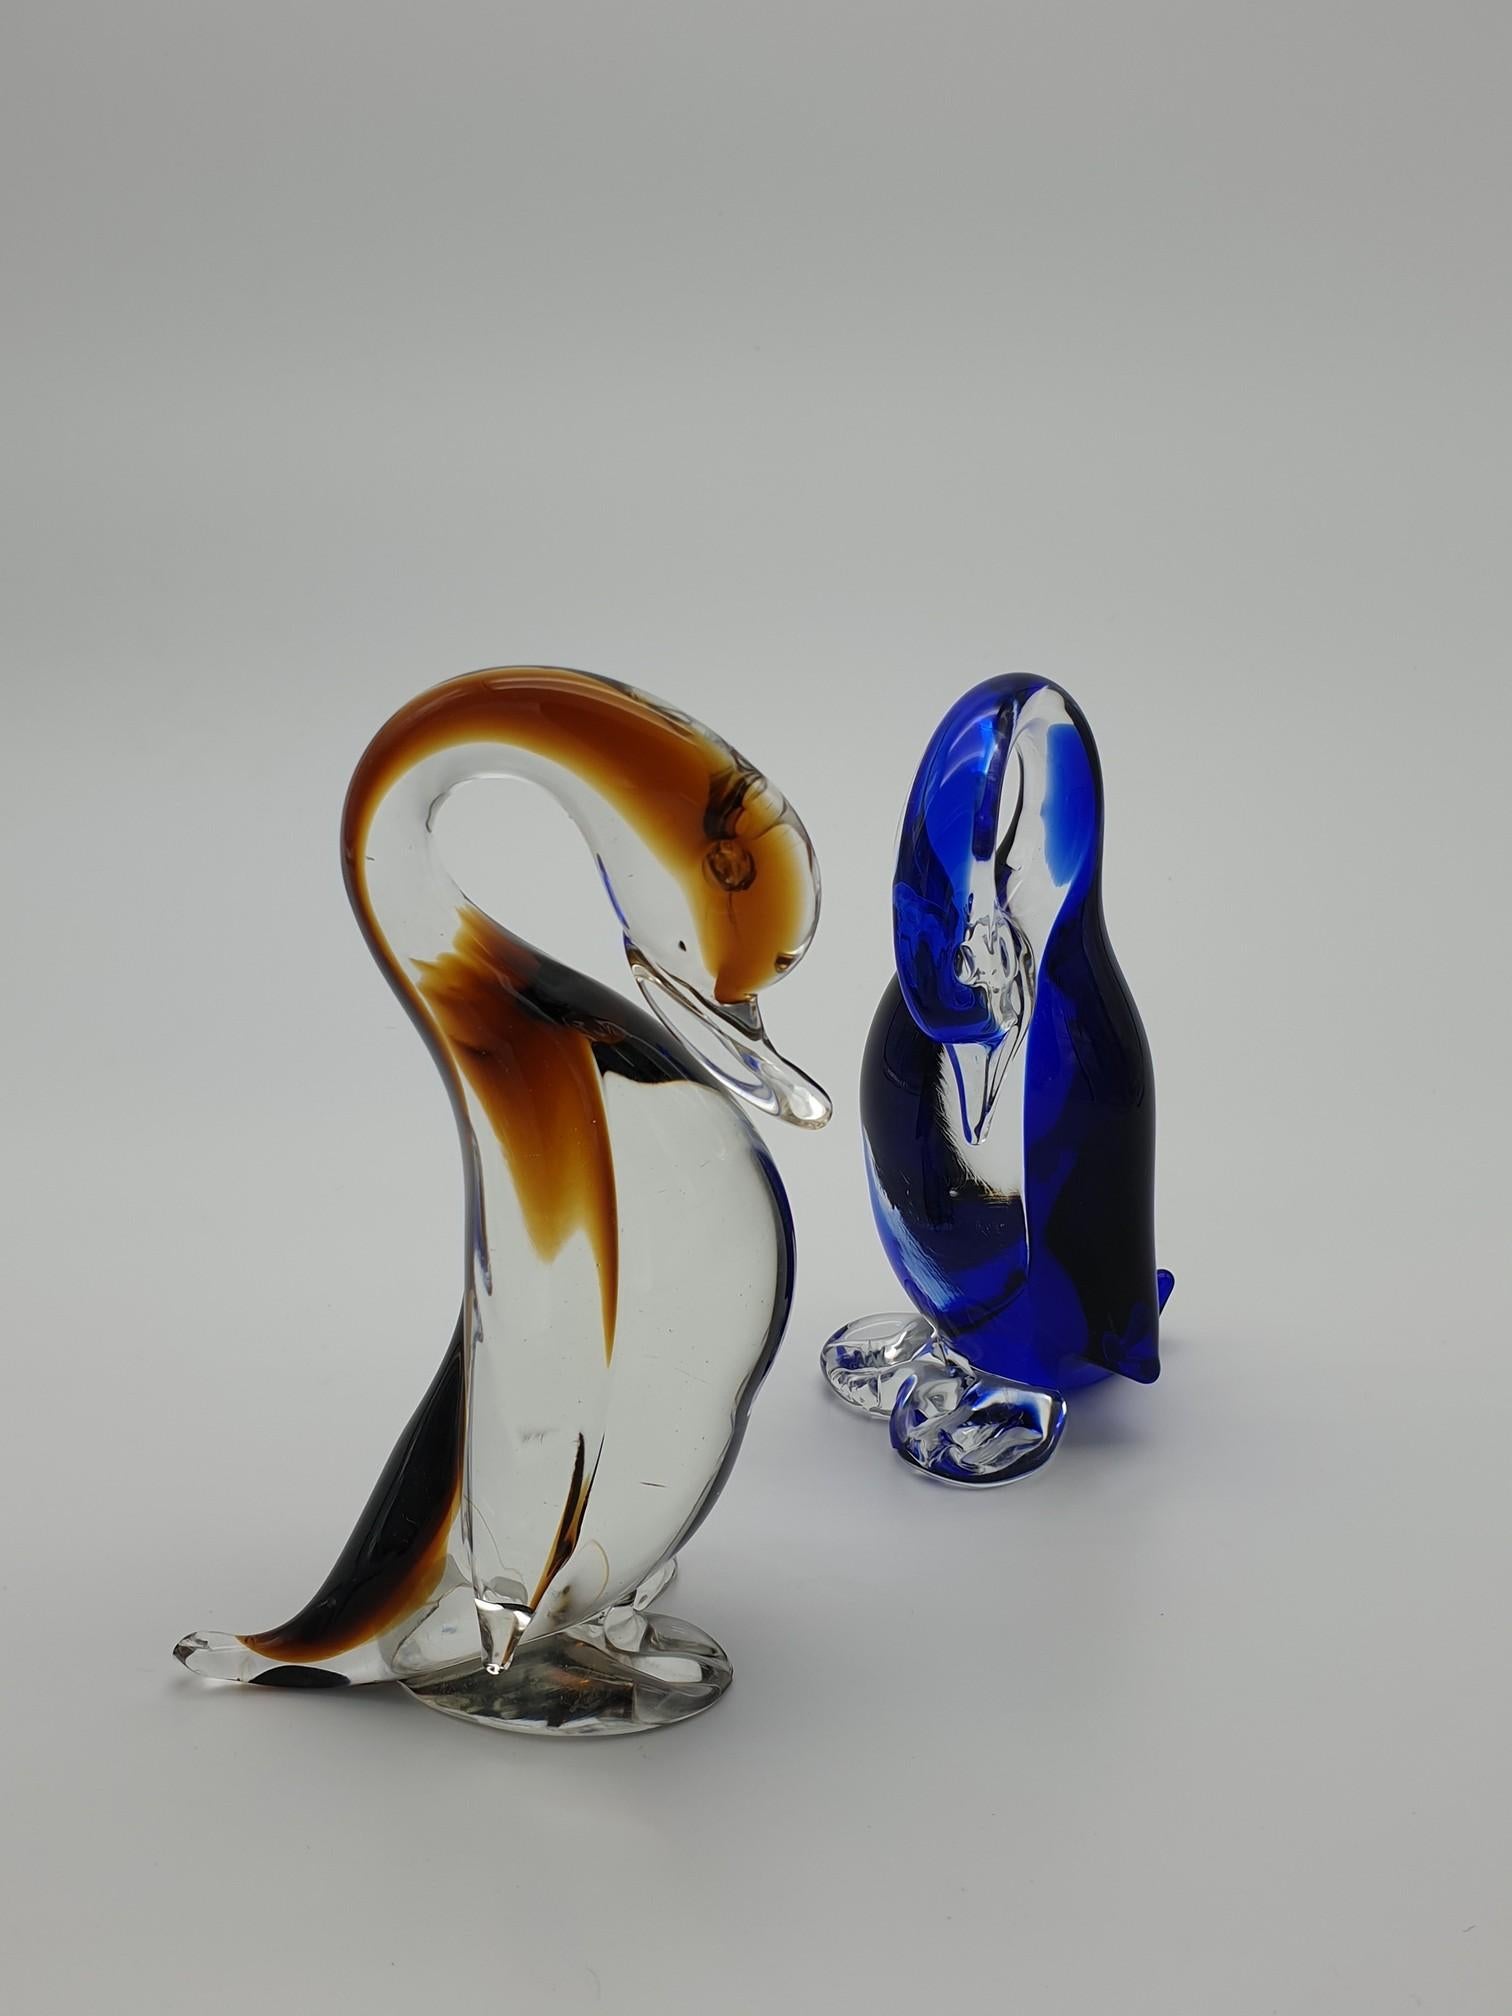 Pair of small Murano glass ducks, manufactured at the famous glass-factory Gino Cenedese e Figlio from the 1960s throughout the 1990s. These glass ducks have been completely handmade, in clear glass with splashes of black and blue color. These